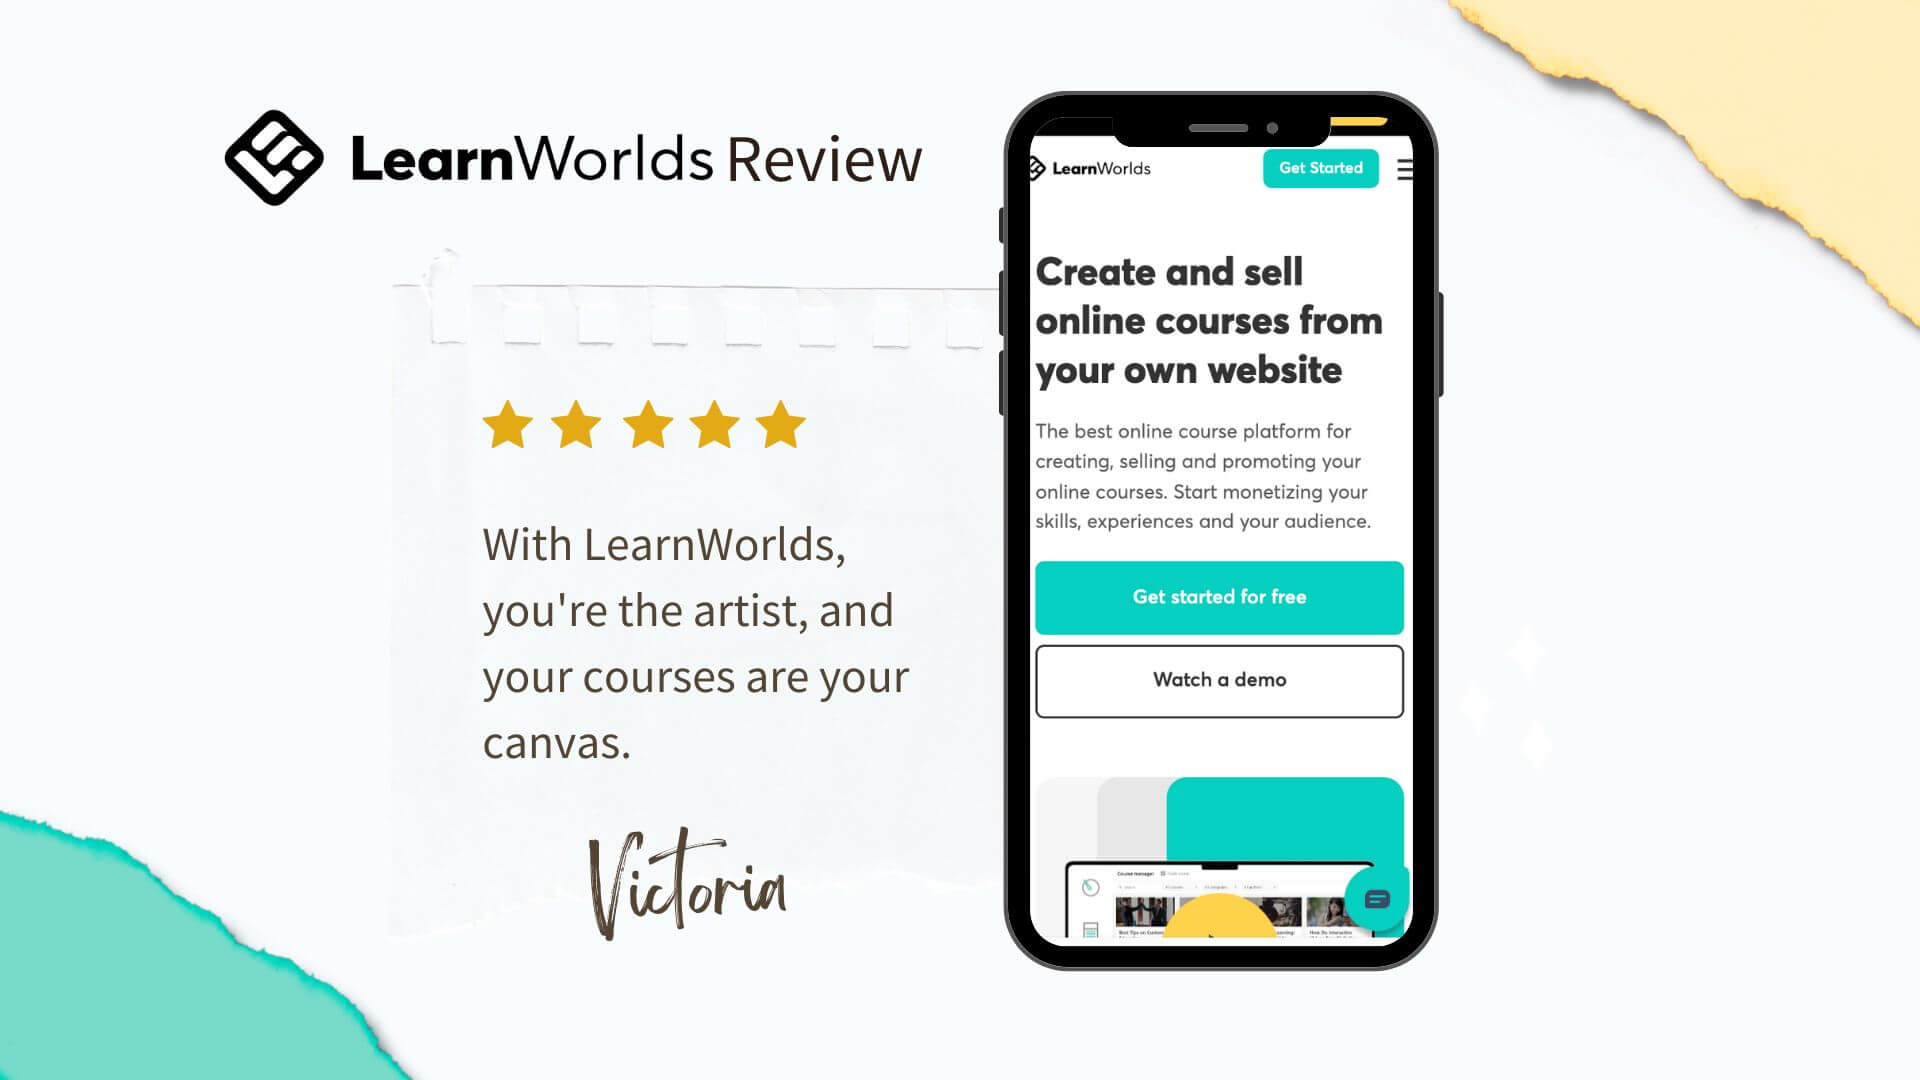 LearnWorlds Review